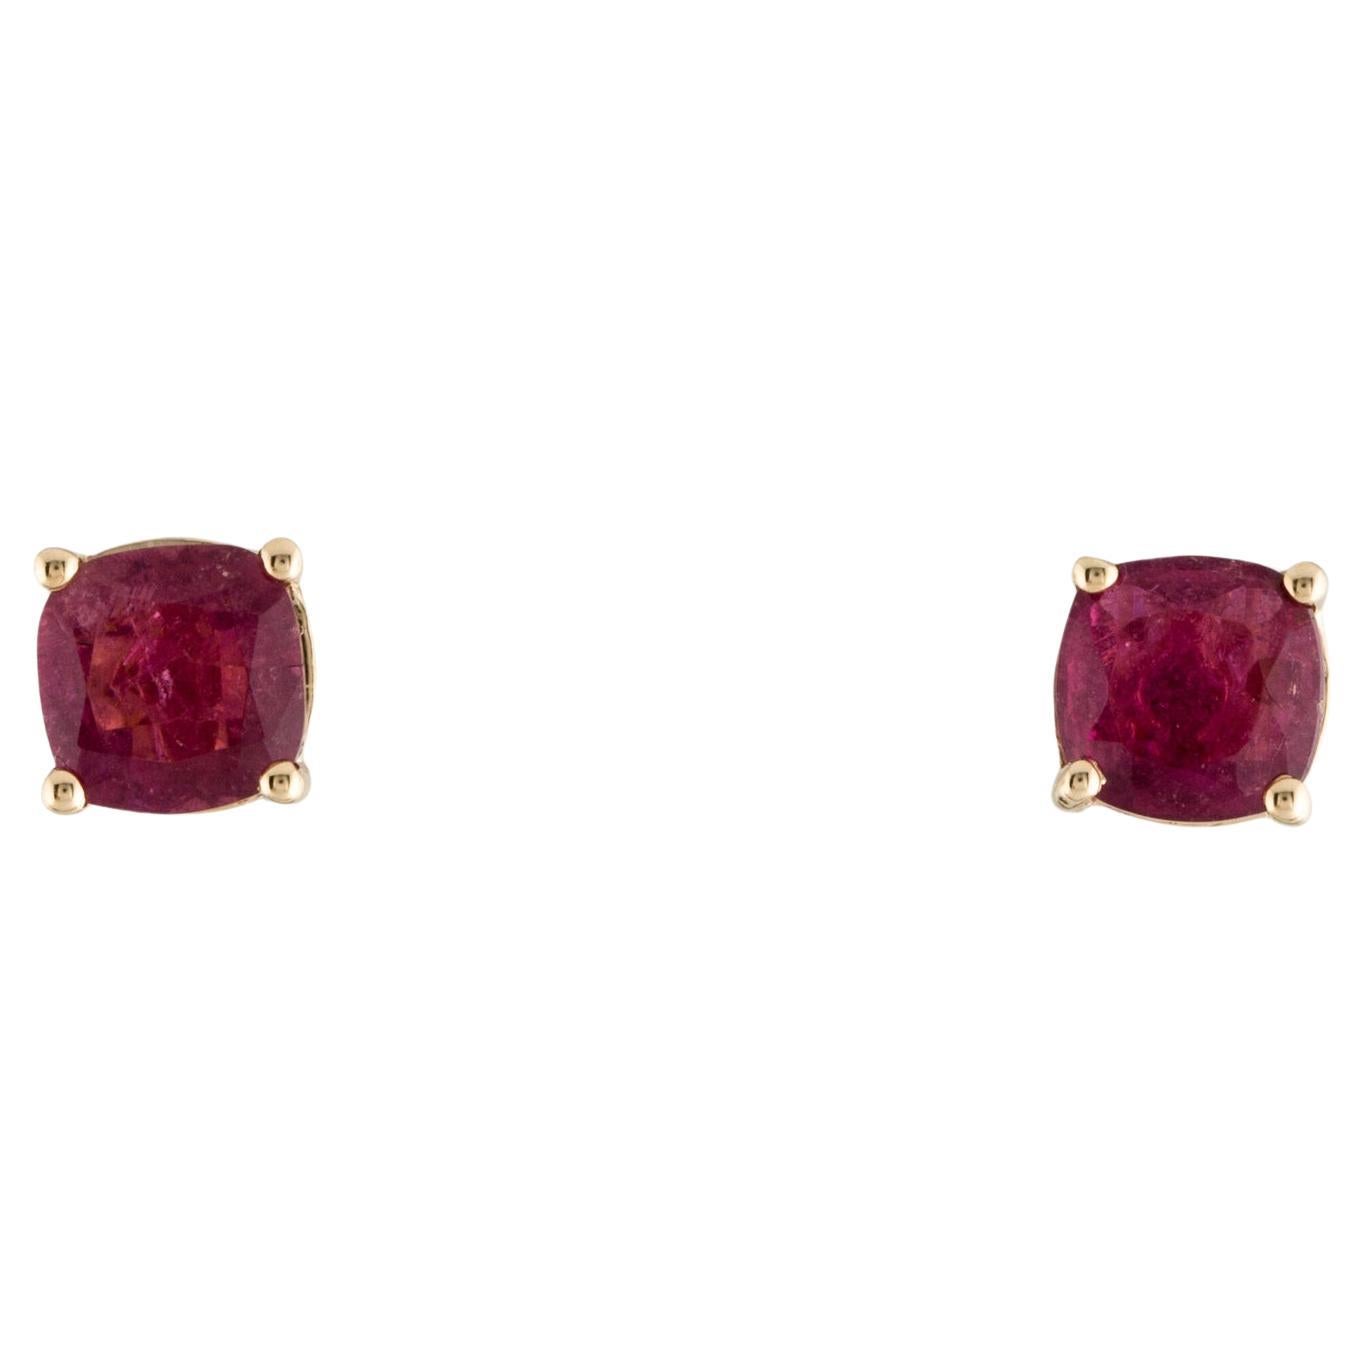 Exquisite 14K Tourmaline Stud Earrings - Stunning & Timeless Glamour Jewelry For Sale